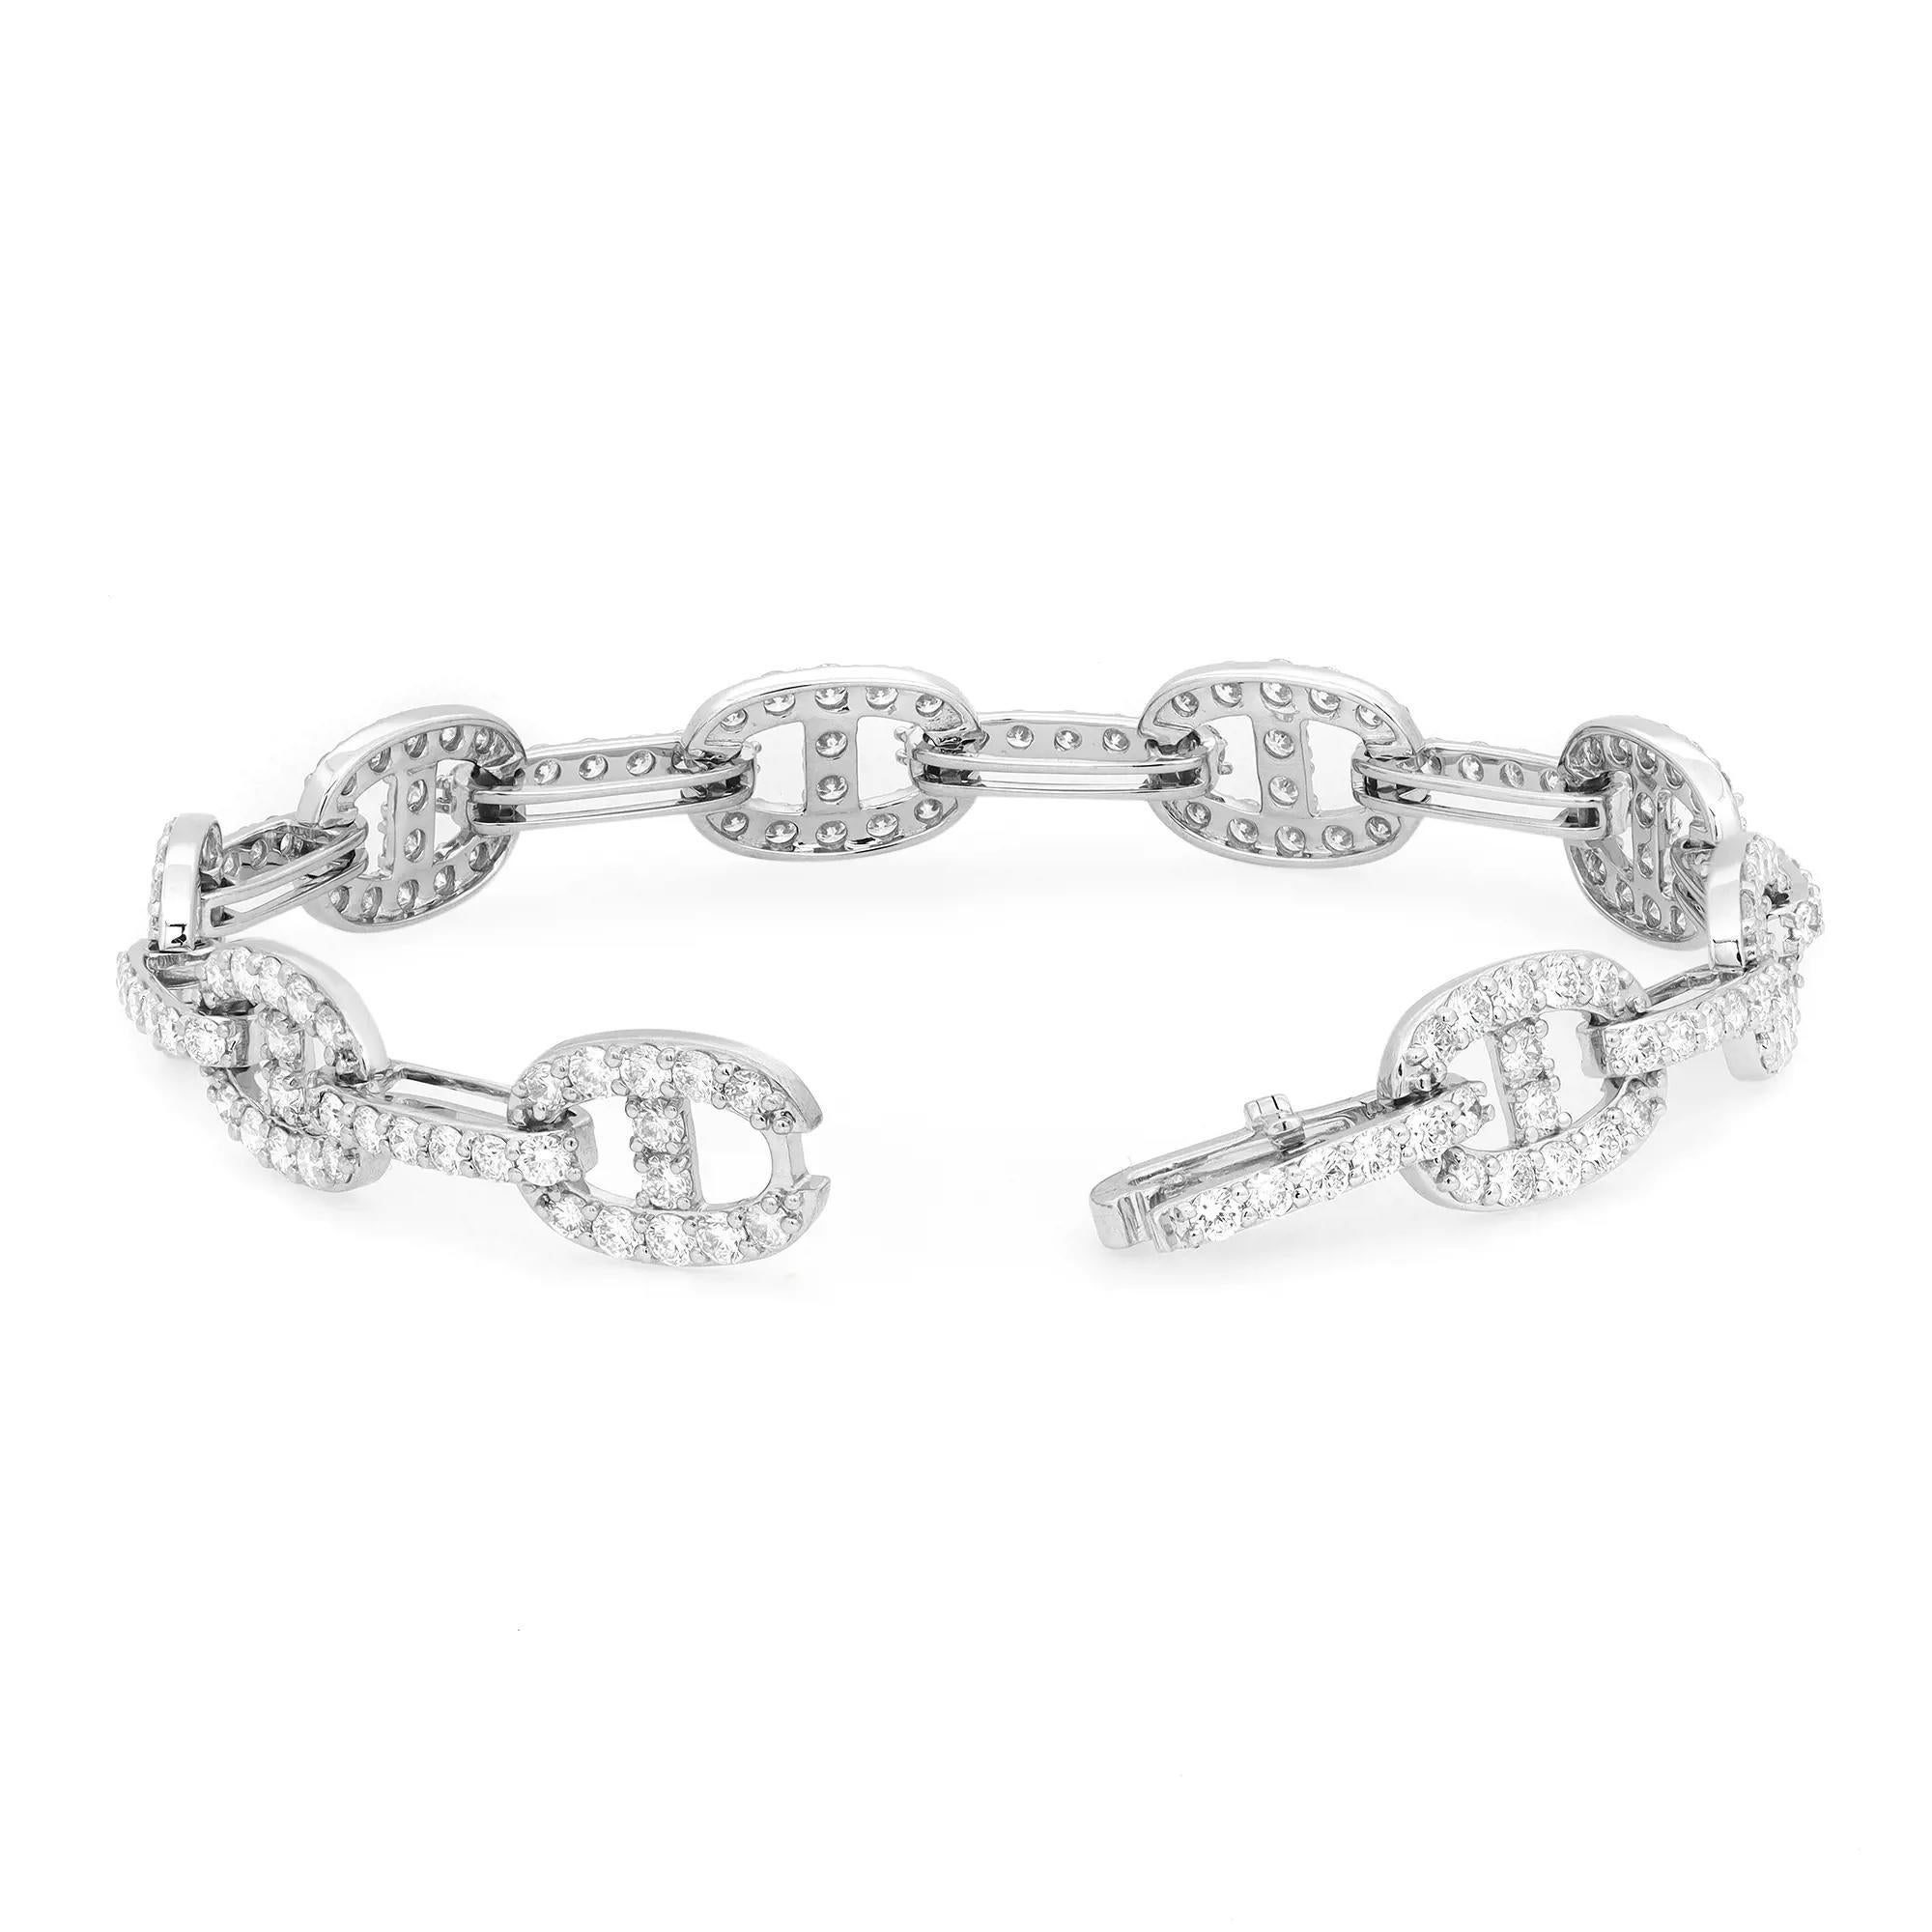 This trendy and chic bracelet features diamond studded links crafted in 18K white gold. Total diamond weight: 5.00 carats. Diamond quality: color G-H and clarity VS-SI. Bracelet length: 7 inches. Link size: 12mm x 9mm. Total weight: 13.78 grams.